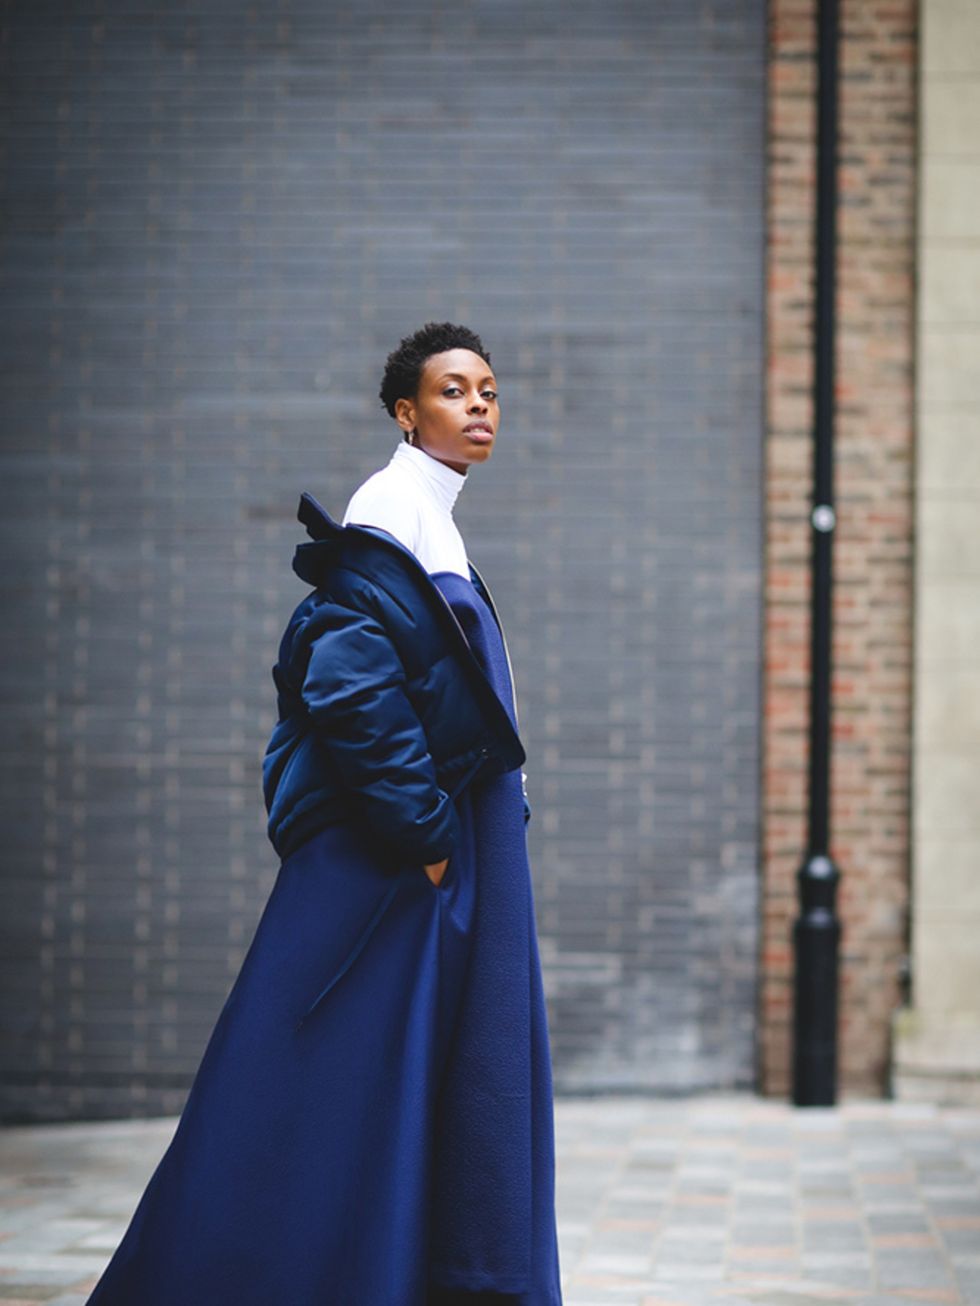 <p>Donna Wallace, Accessories Editor</p>

<p>ASOS White outfit, Dr. Martens boots</p>